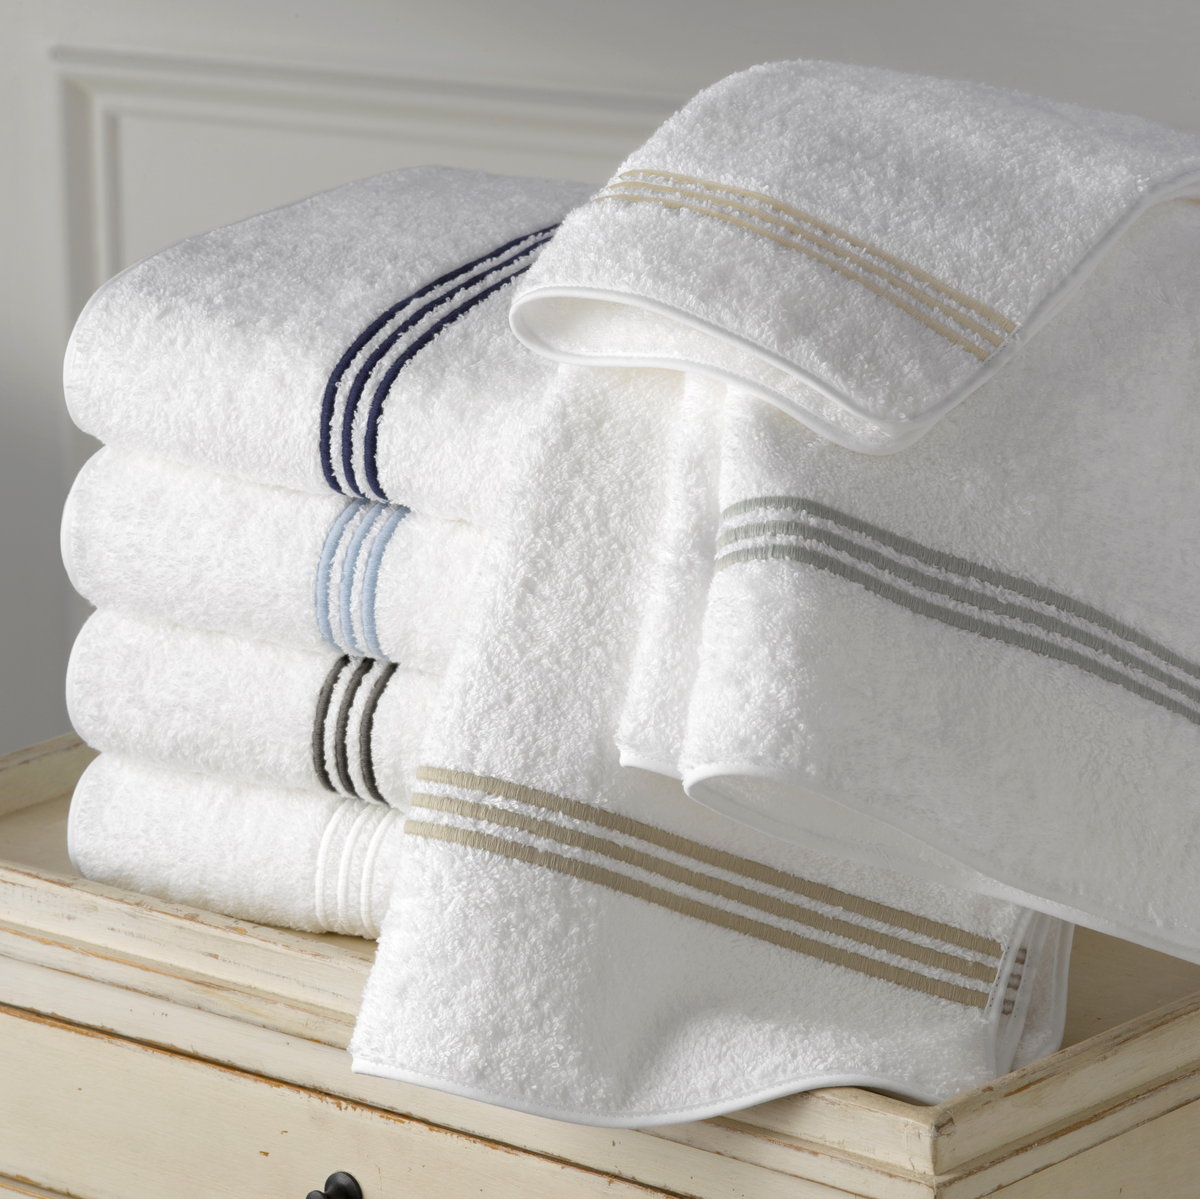 Matouk Bel Tempo Bath Towels and Mats Folded and Stacked